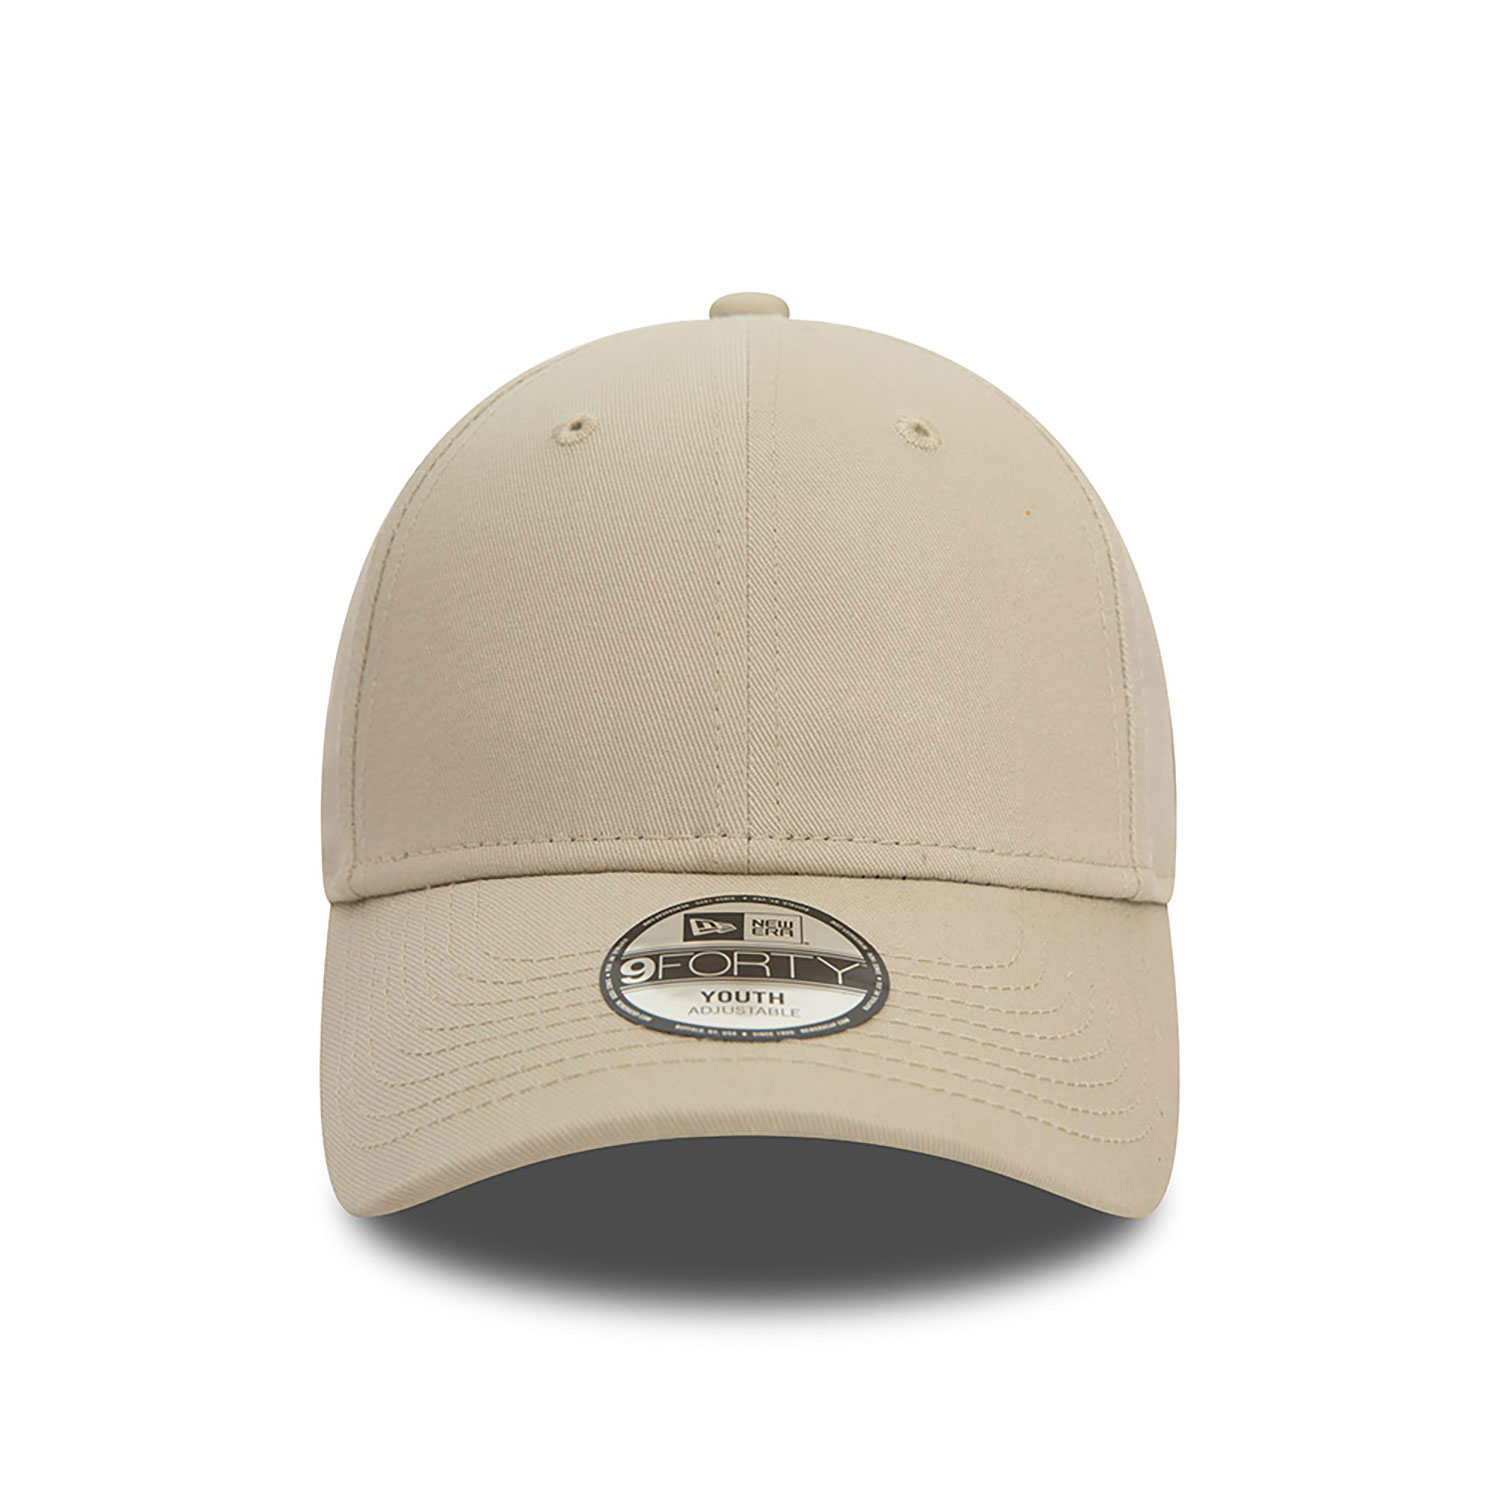 New Era Youth Essential Light Beige 9FORTY Adjustable Cap